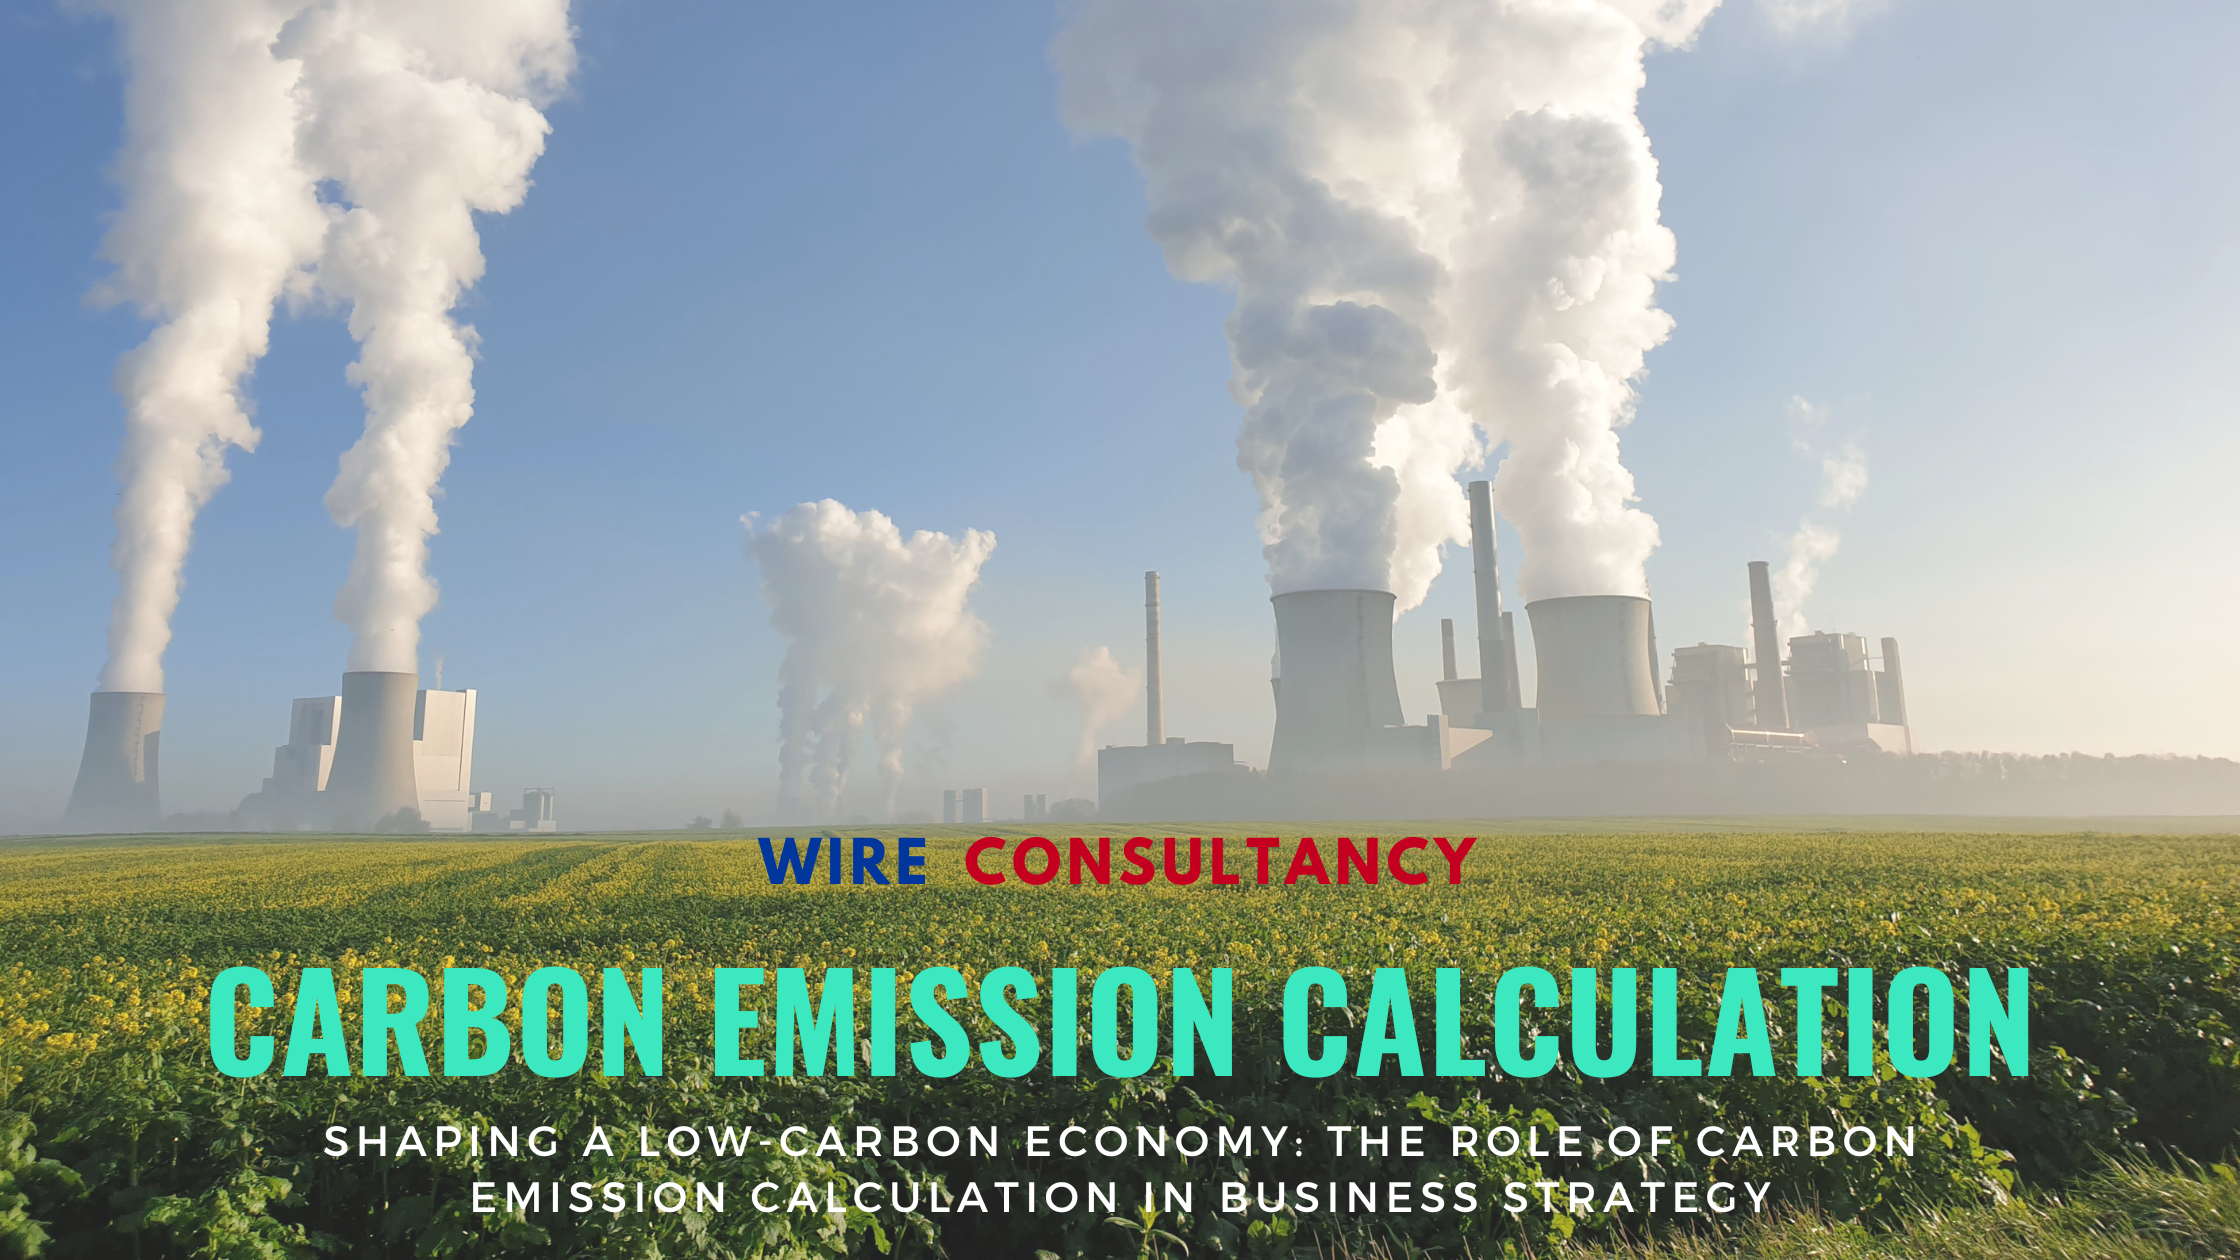 Shaping a Low-Carbon Economy: The Role of Carbon Emission Calculation in Business Strategy